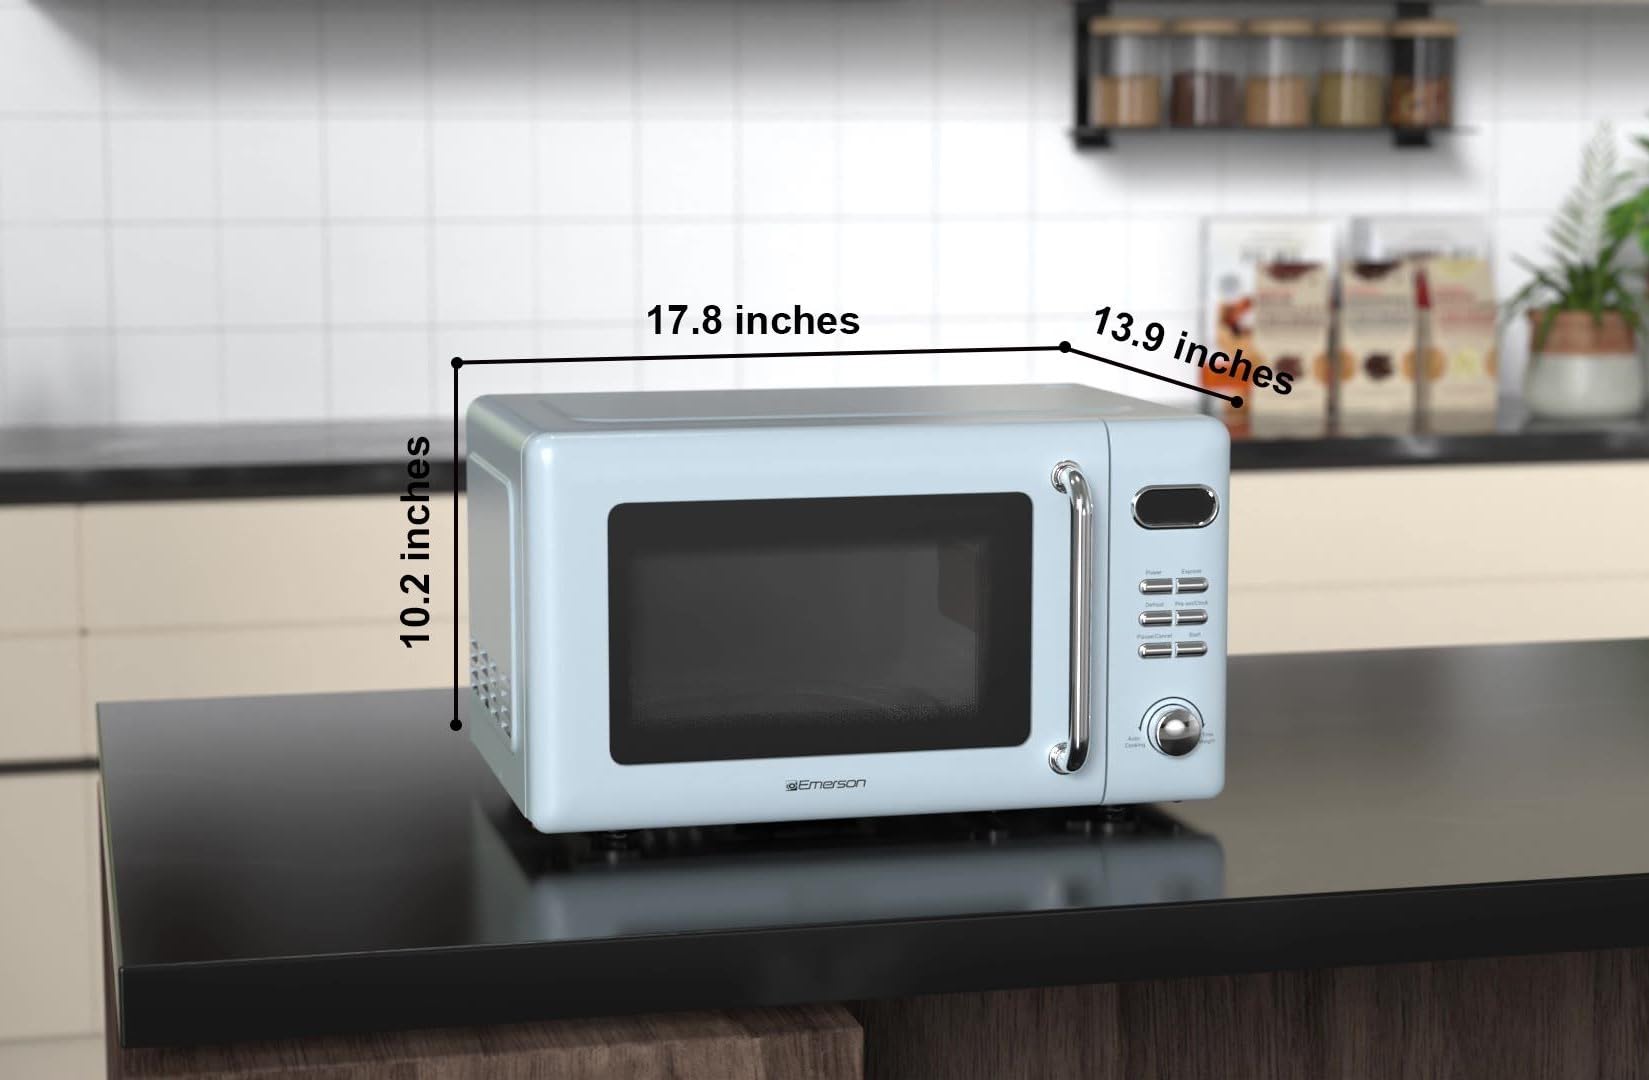 Emerson MWR7020BL-N Retro Digital Microwave Oven with Timer & LED Display 700W, 5 Micro Power Levels, 8 Pre-Programmed Settings, Time & Weight Defrost with Child Safe Lock, 0.7 Cu. Ft, Blue